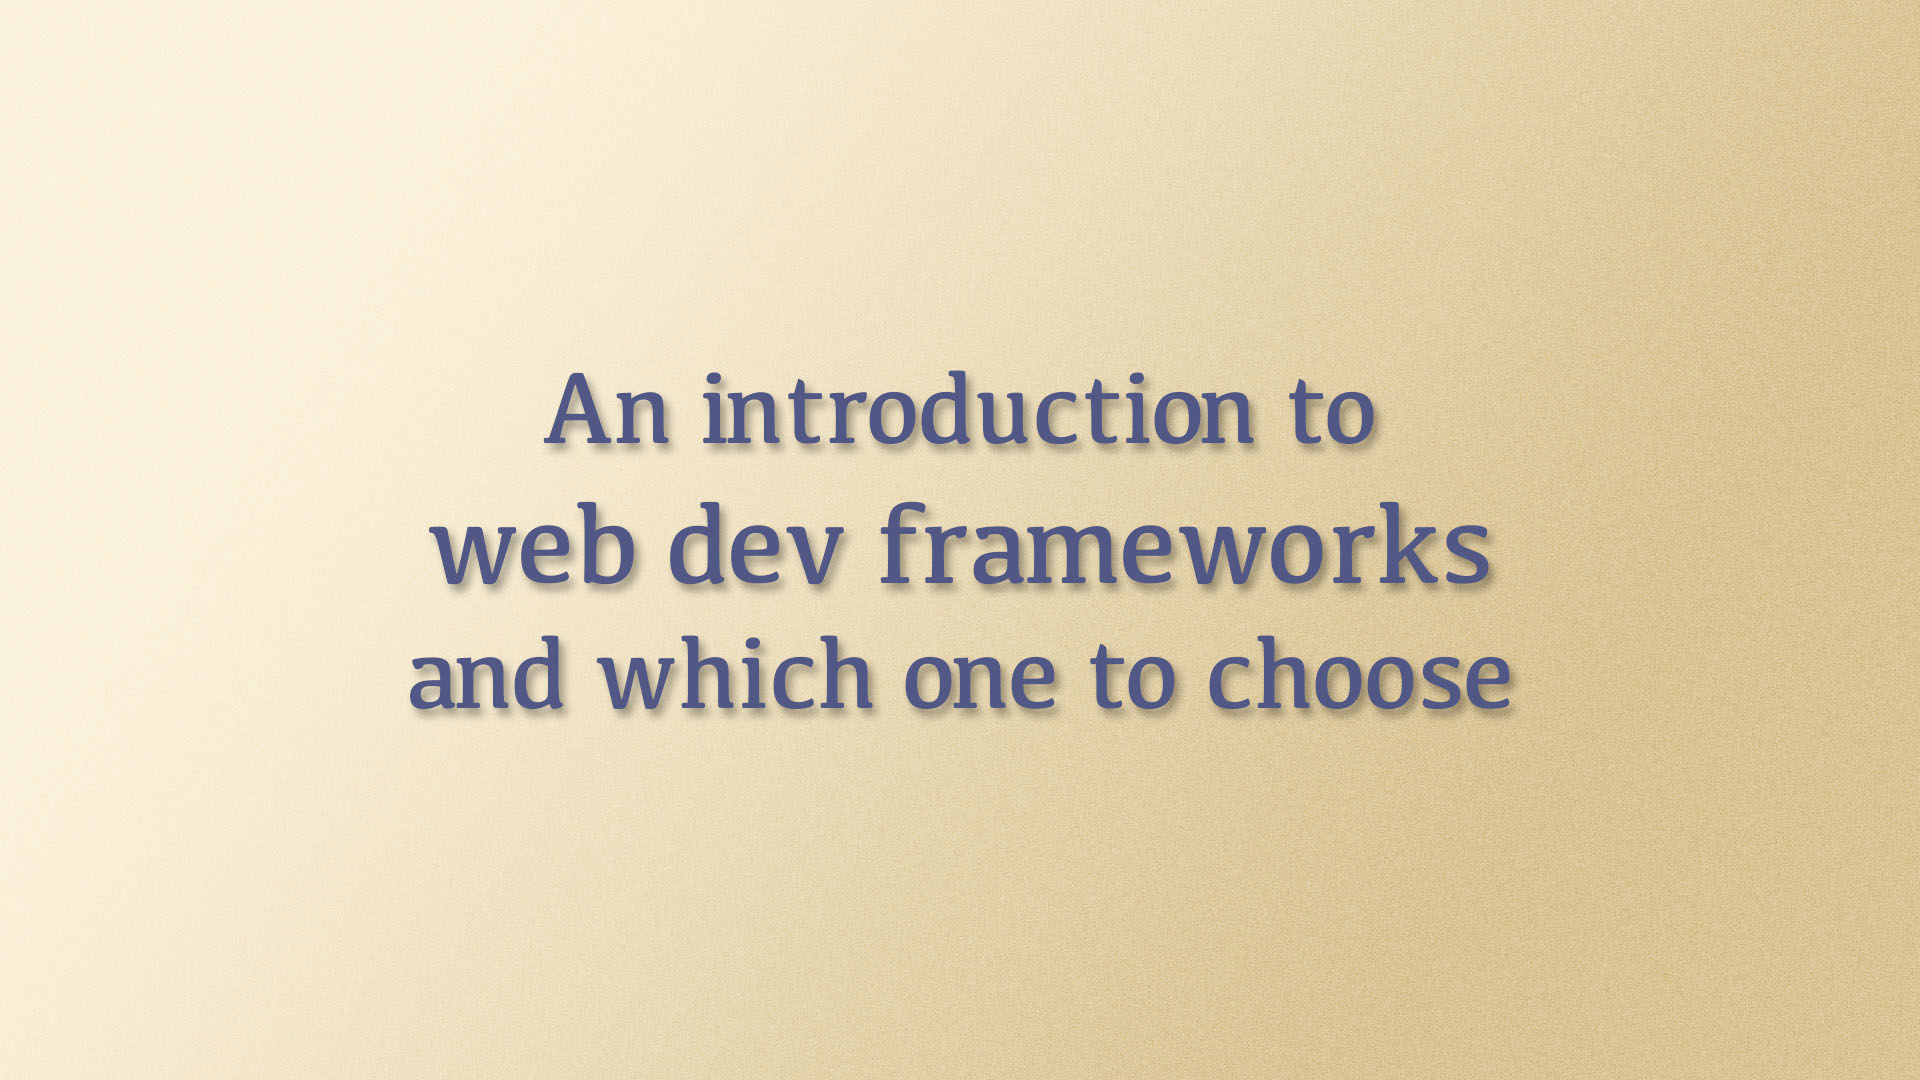 Thumbnail of An introduction to web development frameworks and which one to choose